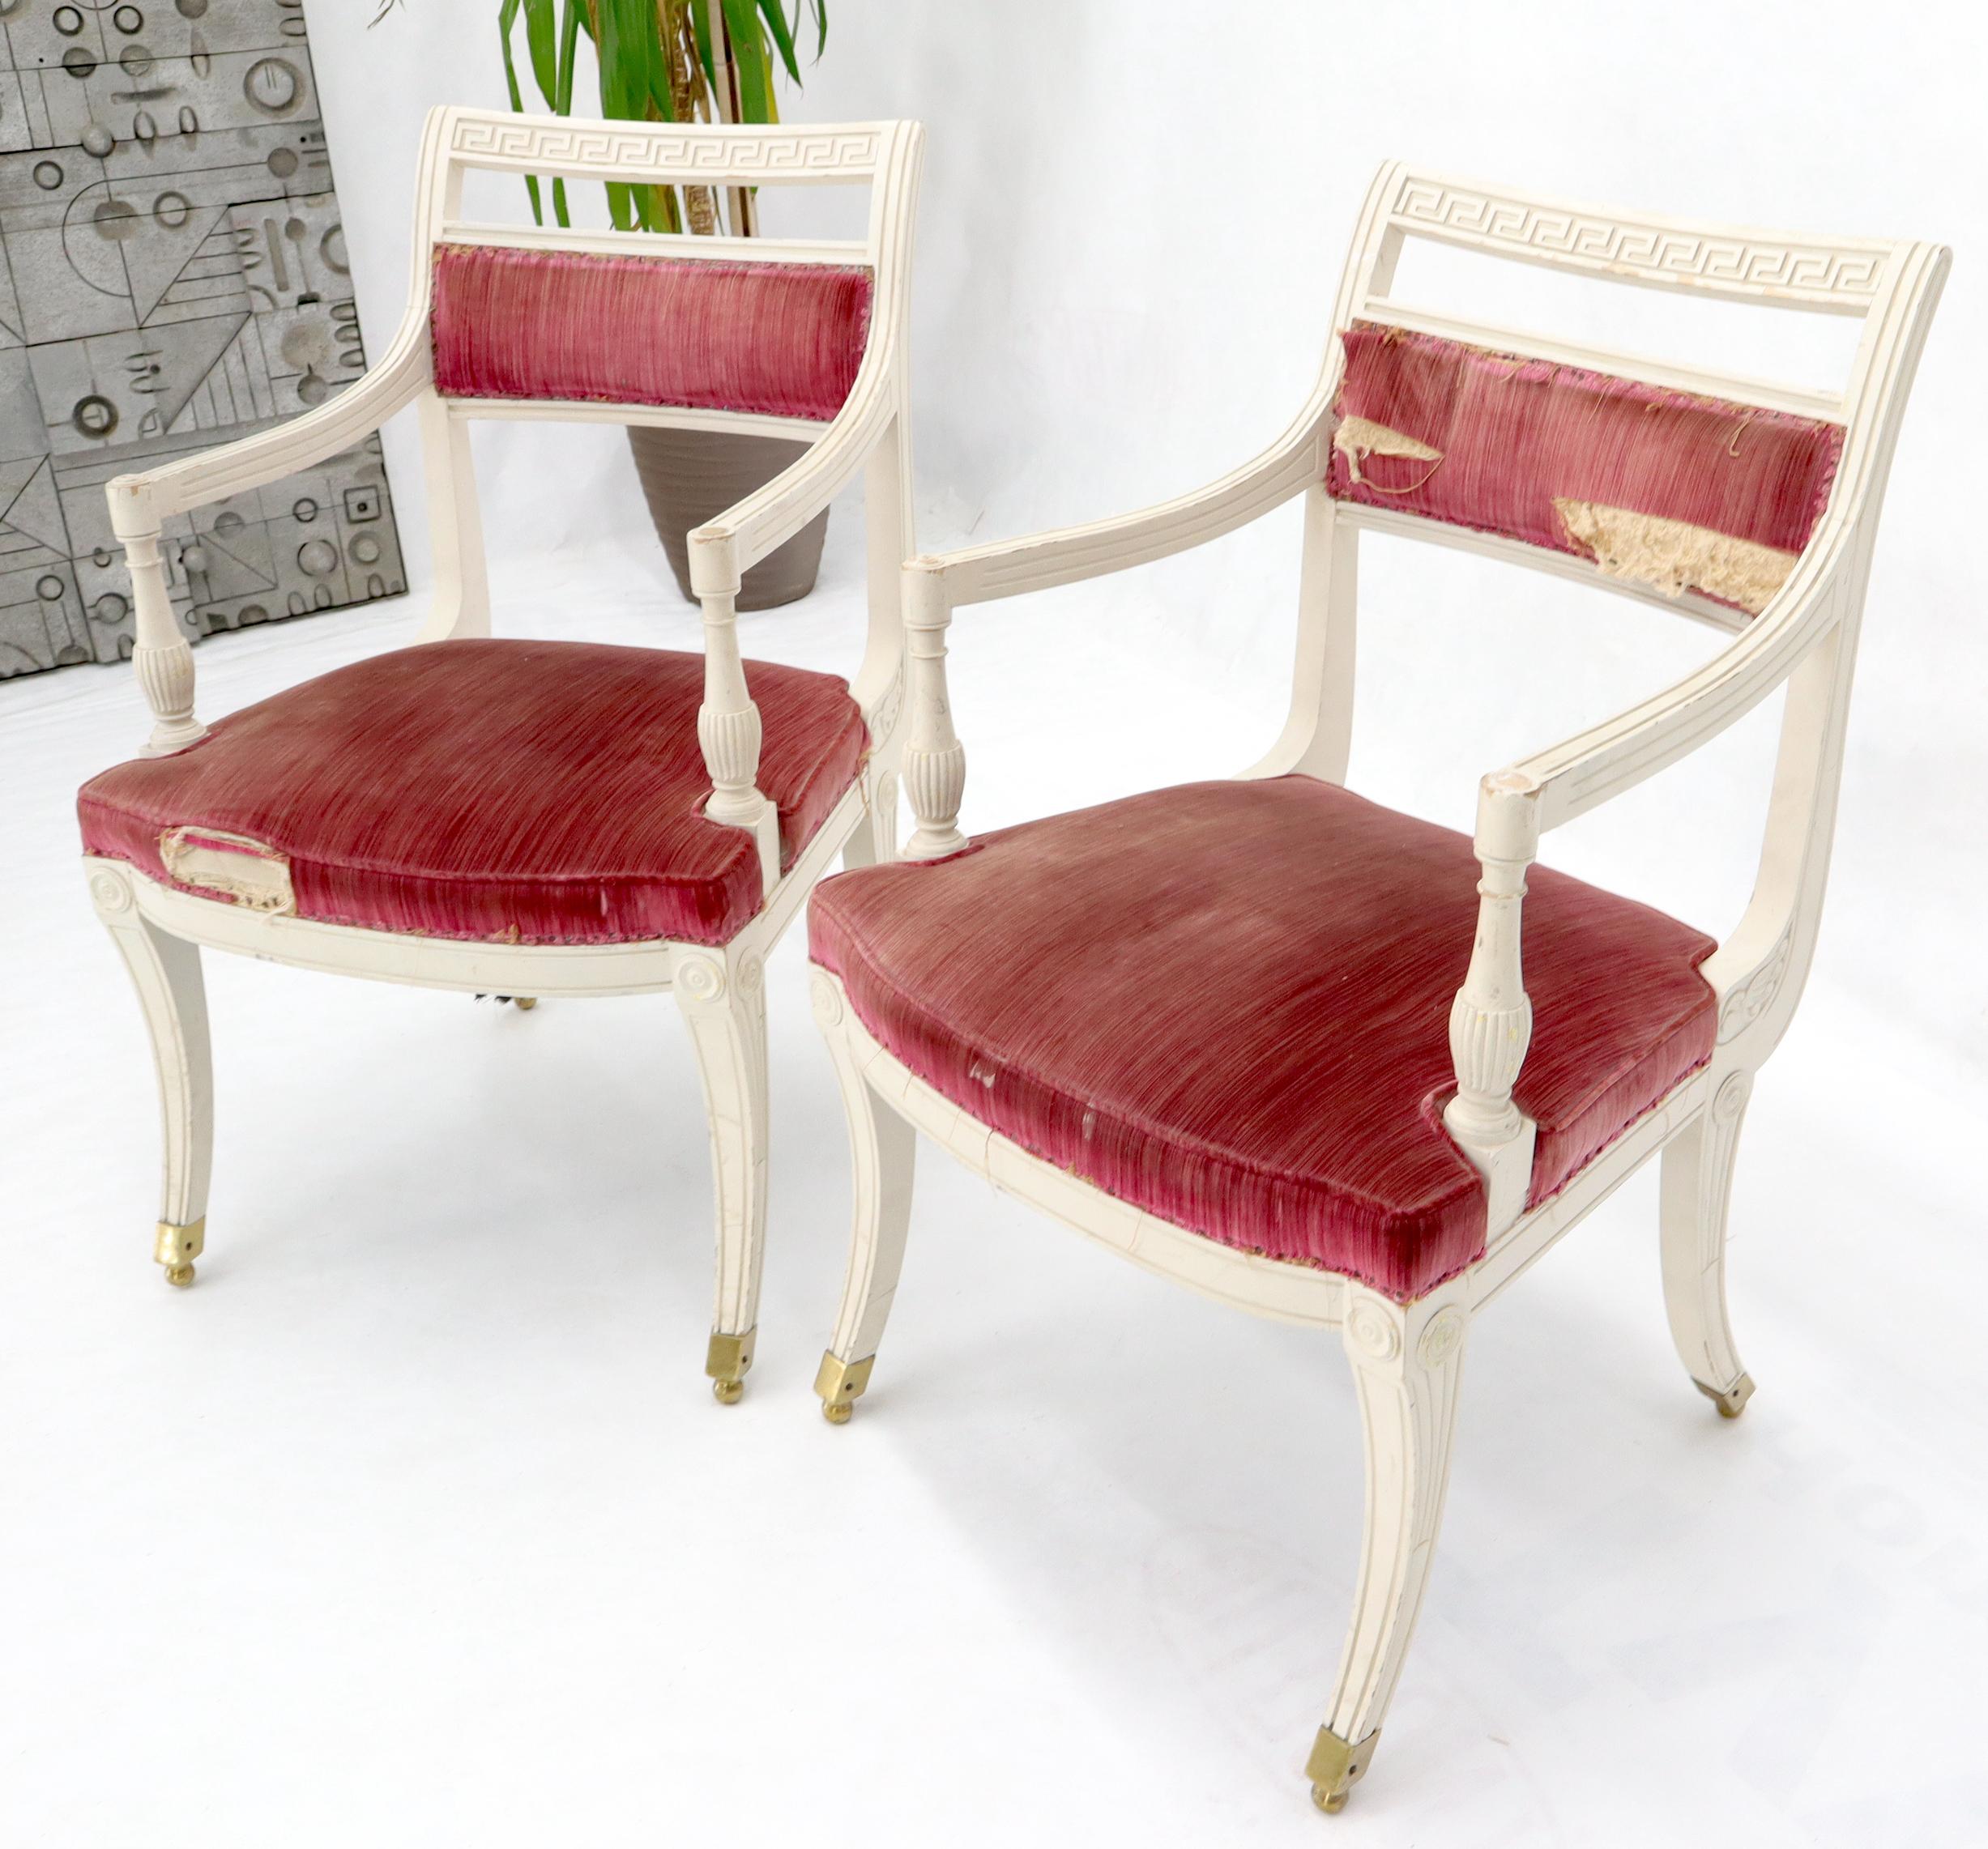 Pair of Decorative Regency Style Armchairs on Brass Ball Feet In Fair Condition For Sale In Rockaway, NJ